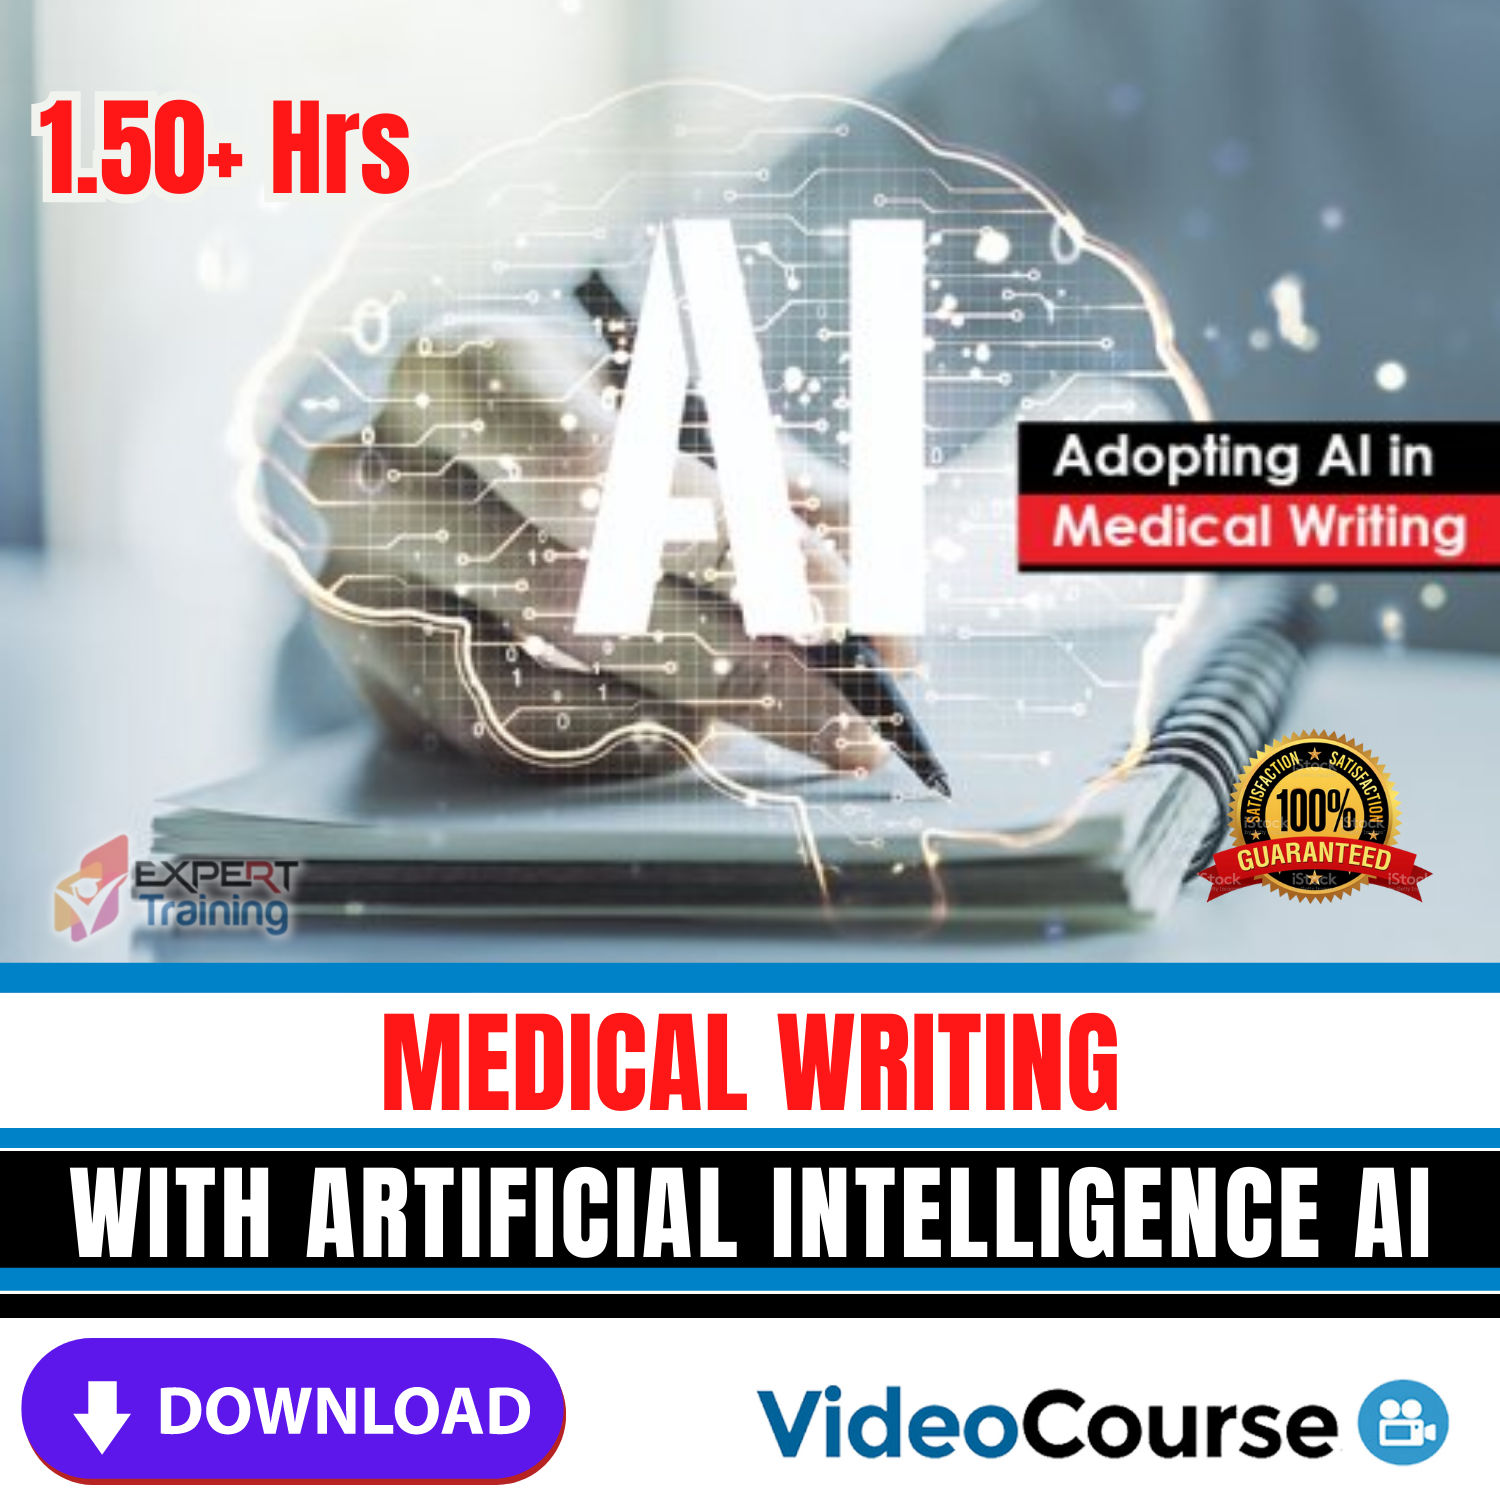 MEDICAL WRITING WITH ARTIFICIAL INTELLIGENCE AI